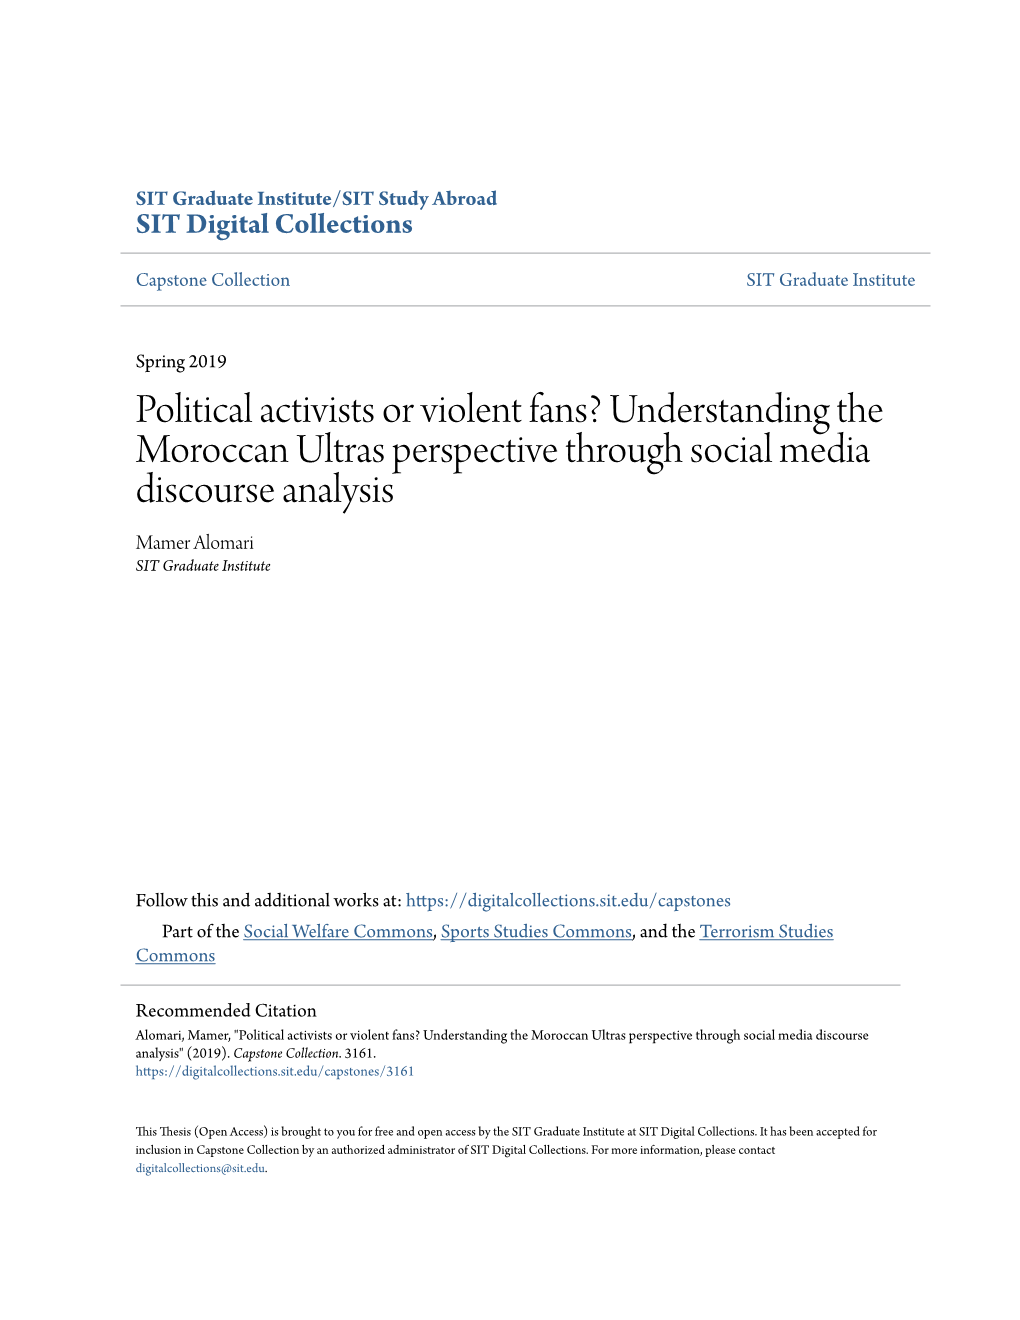 Political Activists Or Violent Fans? Understanding the Moroccan Ultras Perspective Through Social Media Discourse Analysis Mamer Alomari SIT Graduate Institute